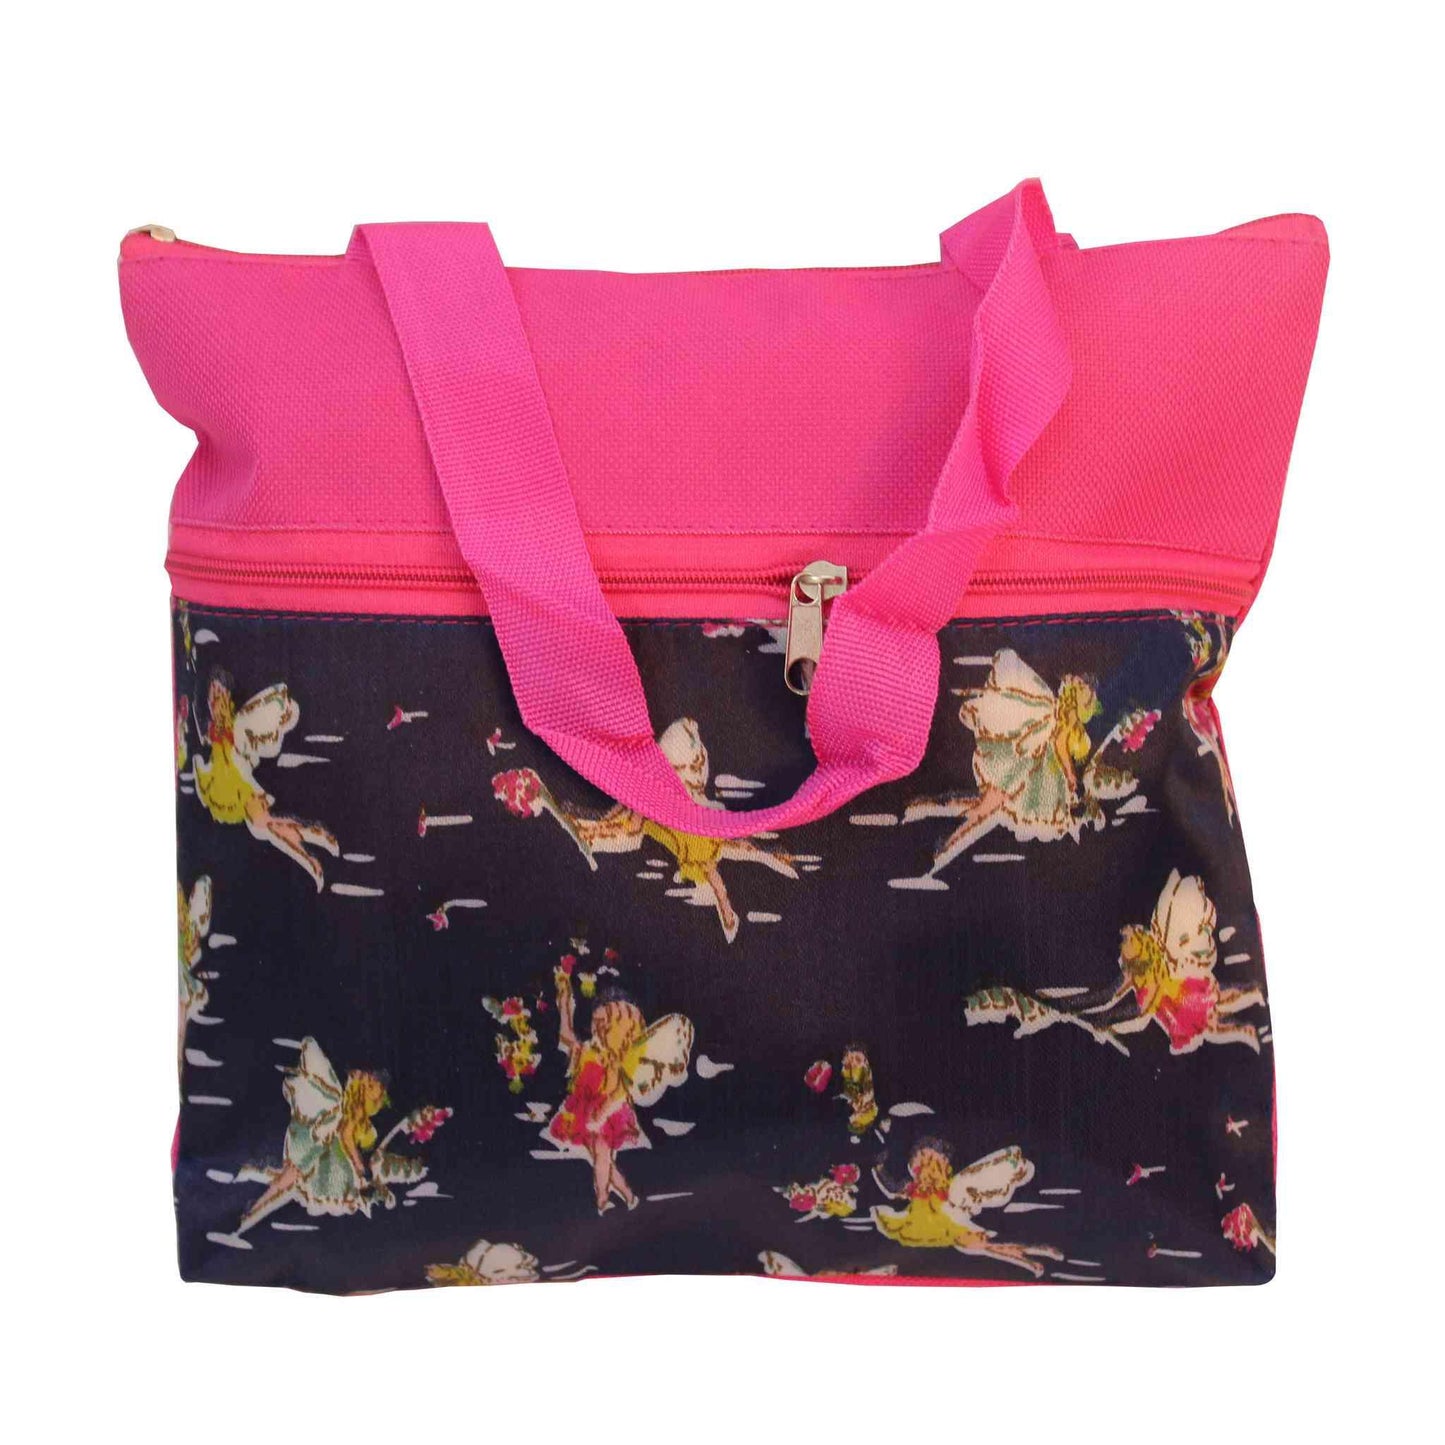 Imported Durable Canvas Printed multi purpose utility Medium size Bag with handles for all occasions for the girls and ladies, Design 1, Pink - Indian Petals